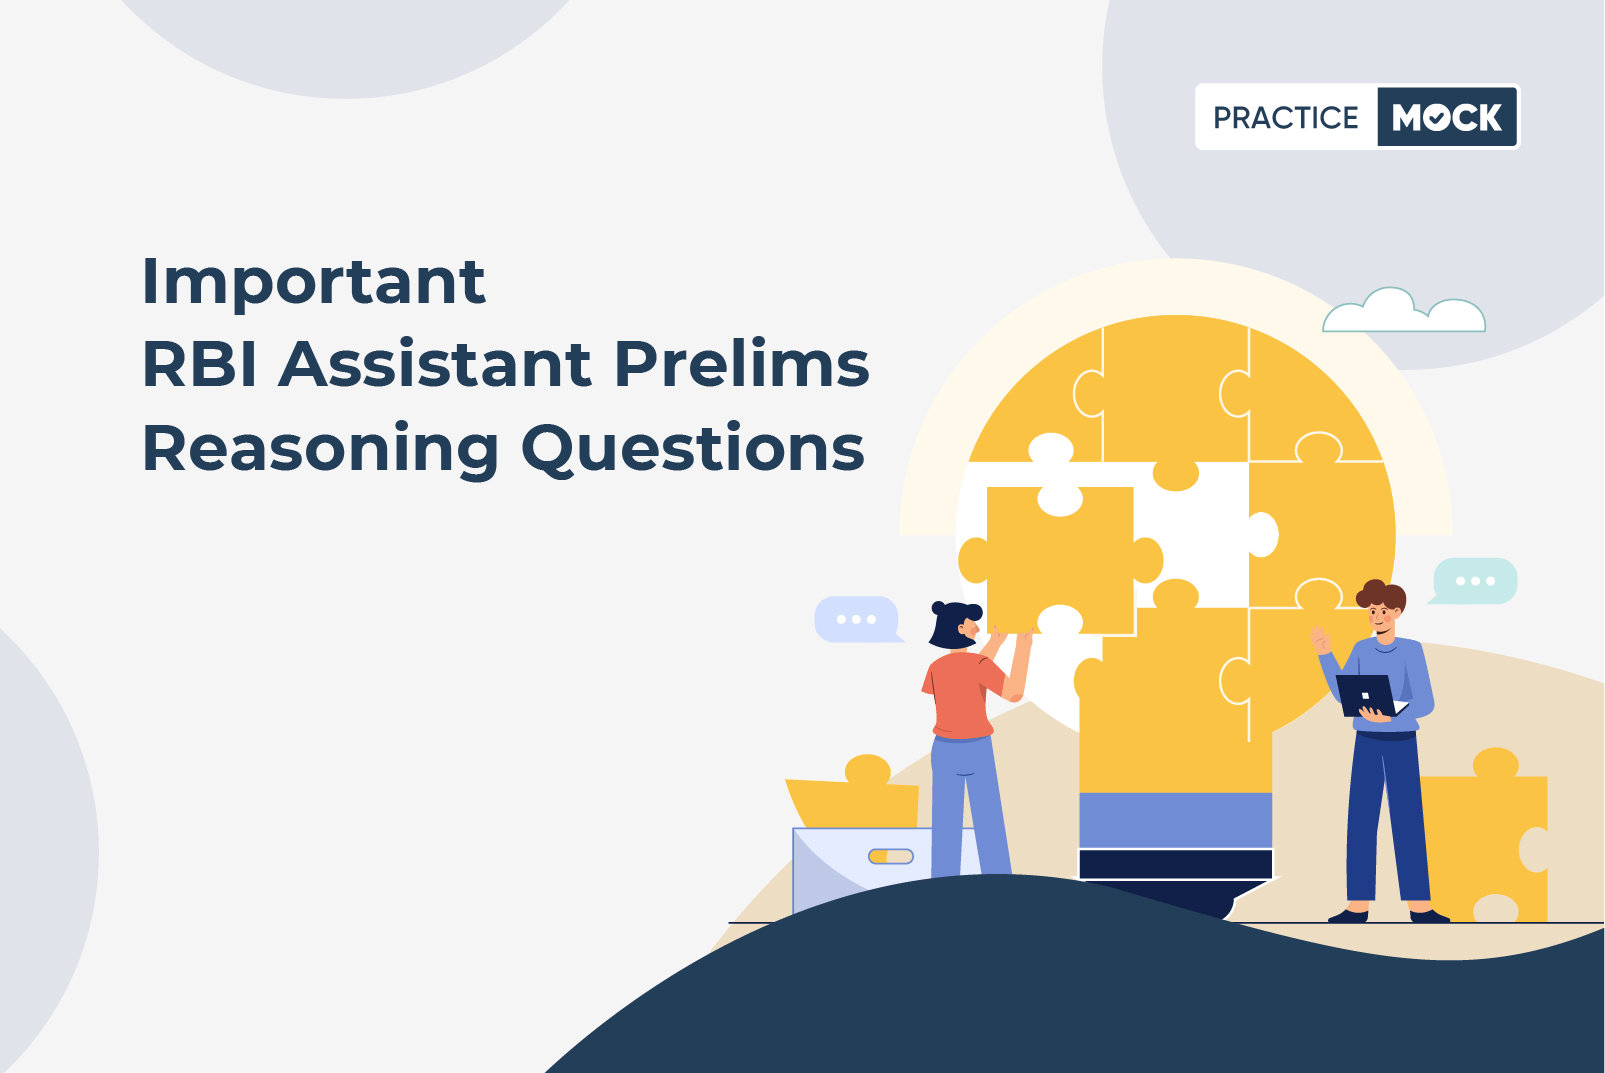 RBI Assistant Prelims Reasoning Questions